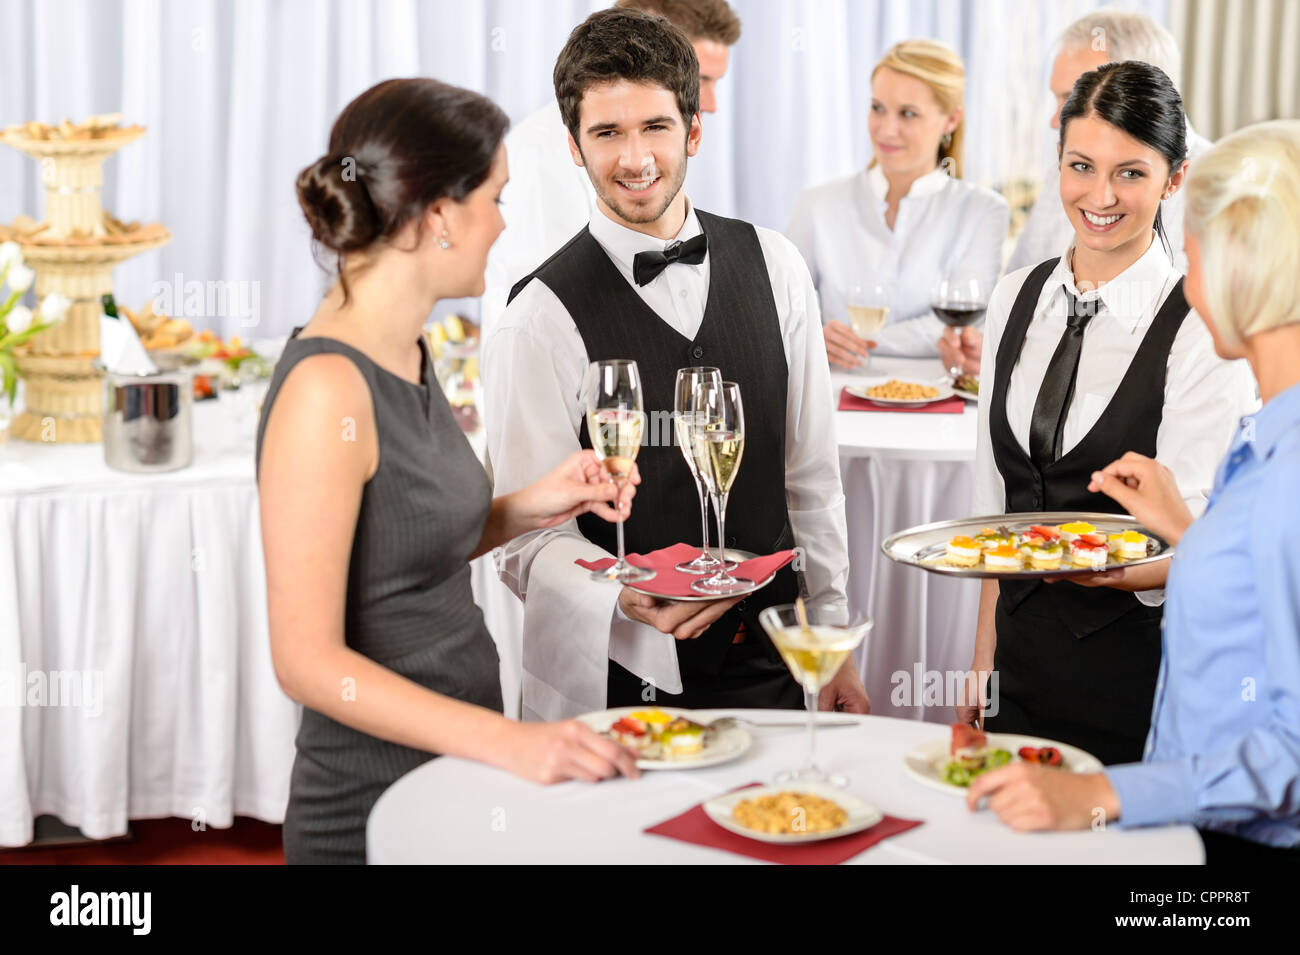 Catering service at business meeting offer food refreshments to woman Stock Photo